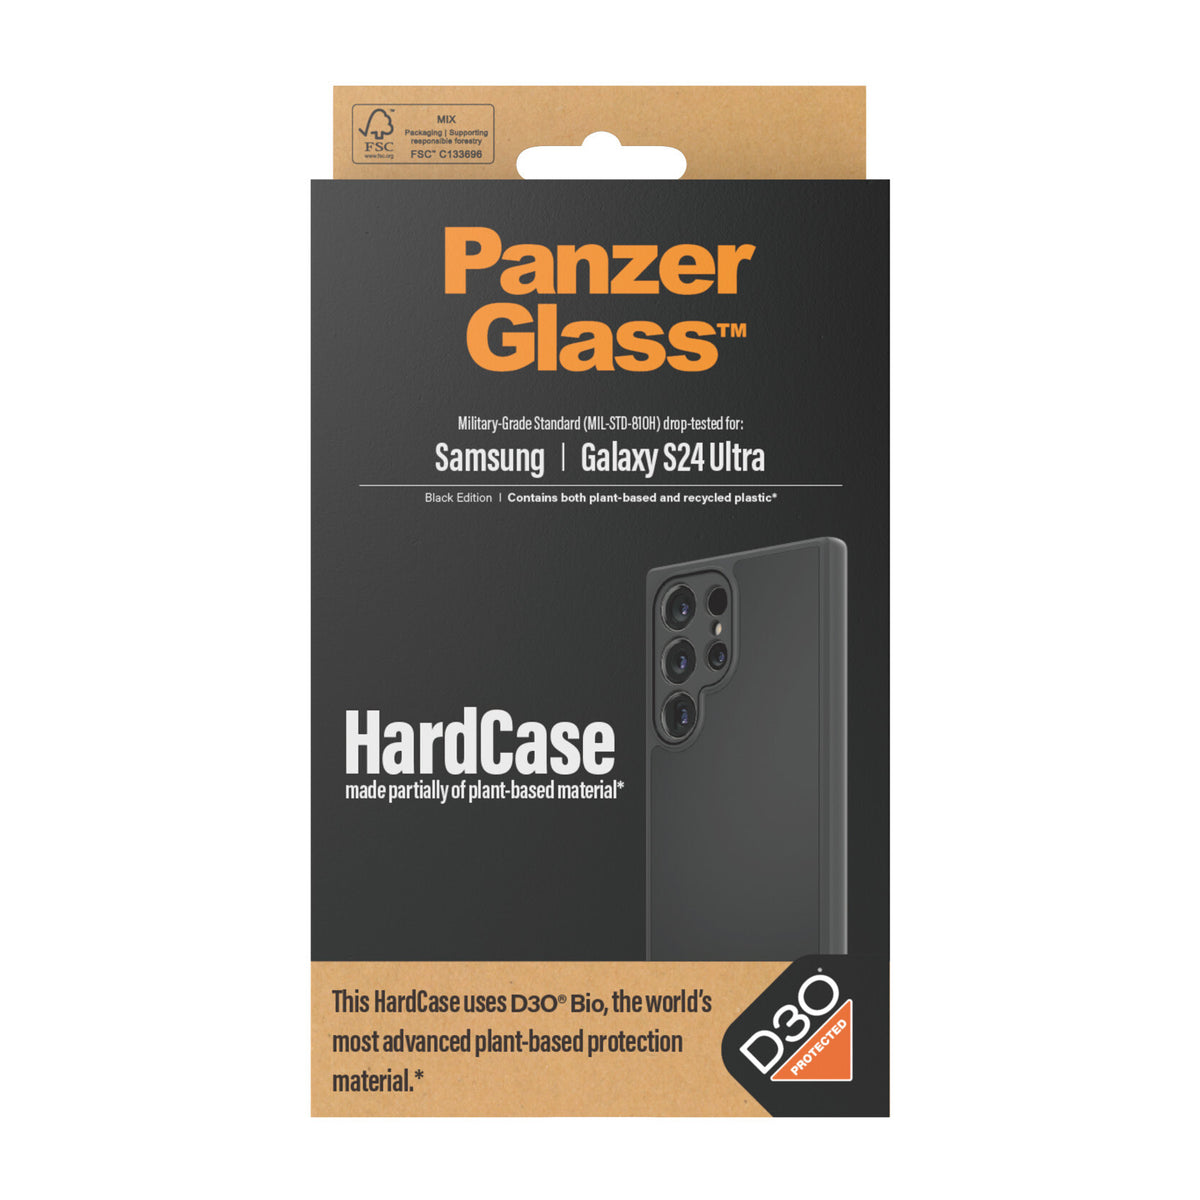 PanzerGlass ® HardCase with D3O® for Galaxy S24 Ultra in Black